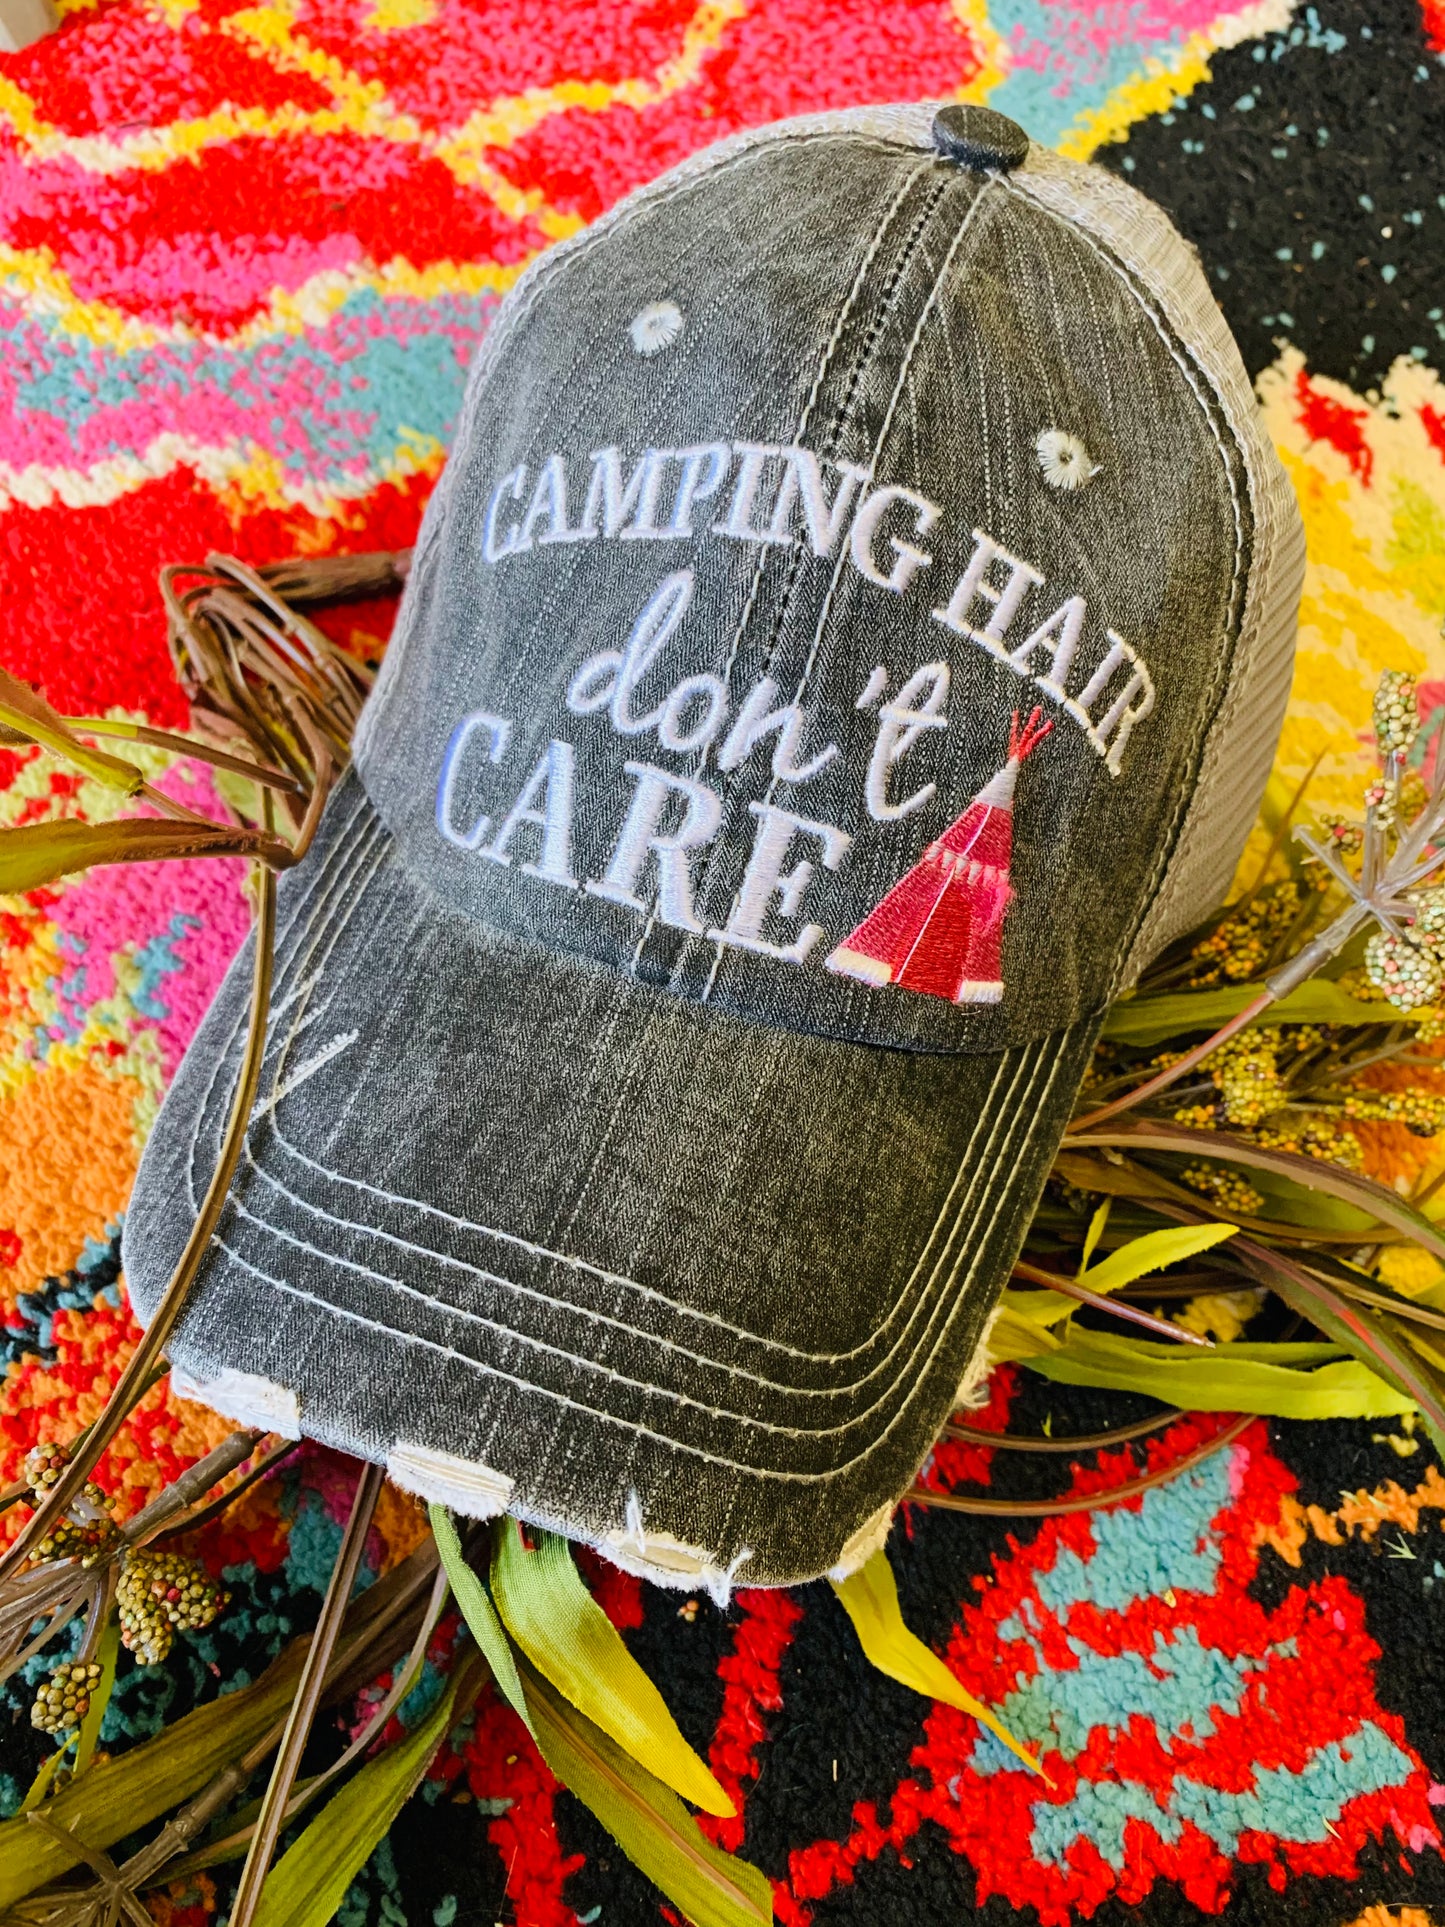 Camping hats Glamping hair dont care Happy camper Camping hair Embroidered Unisex caps - Stacy's Pink Martini Boutique